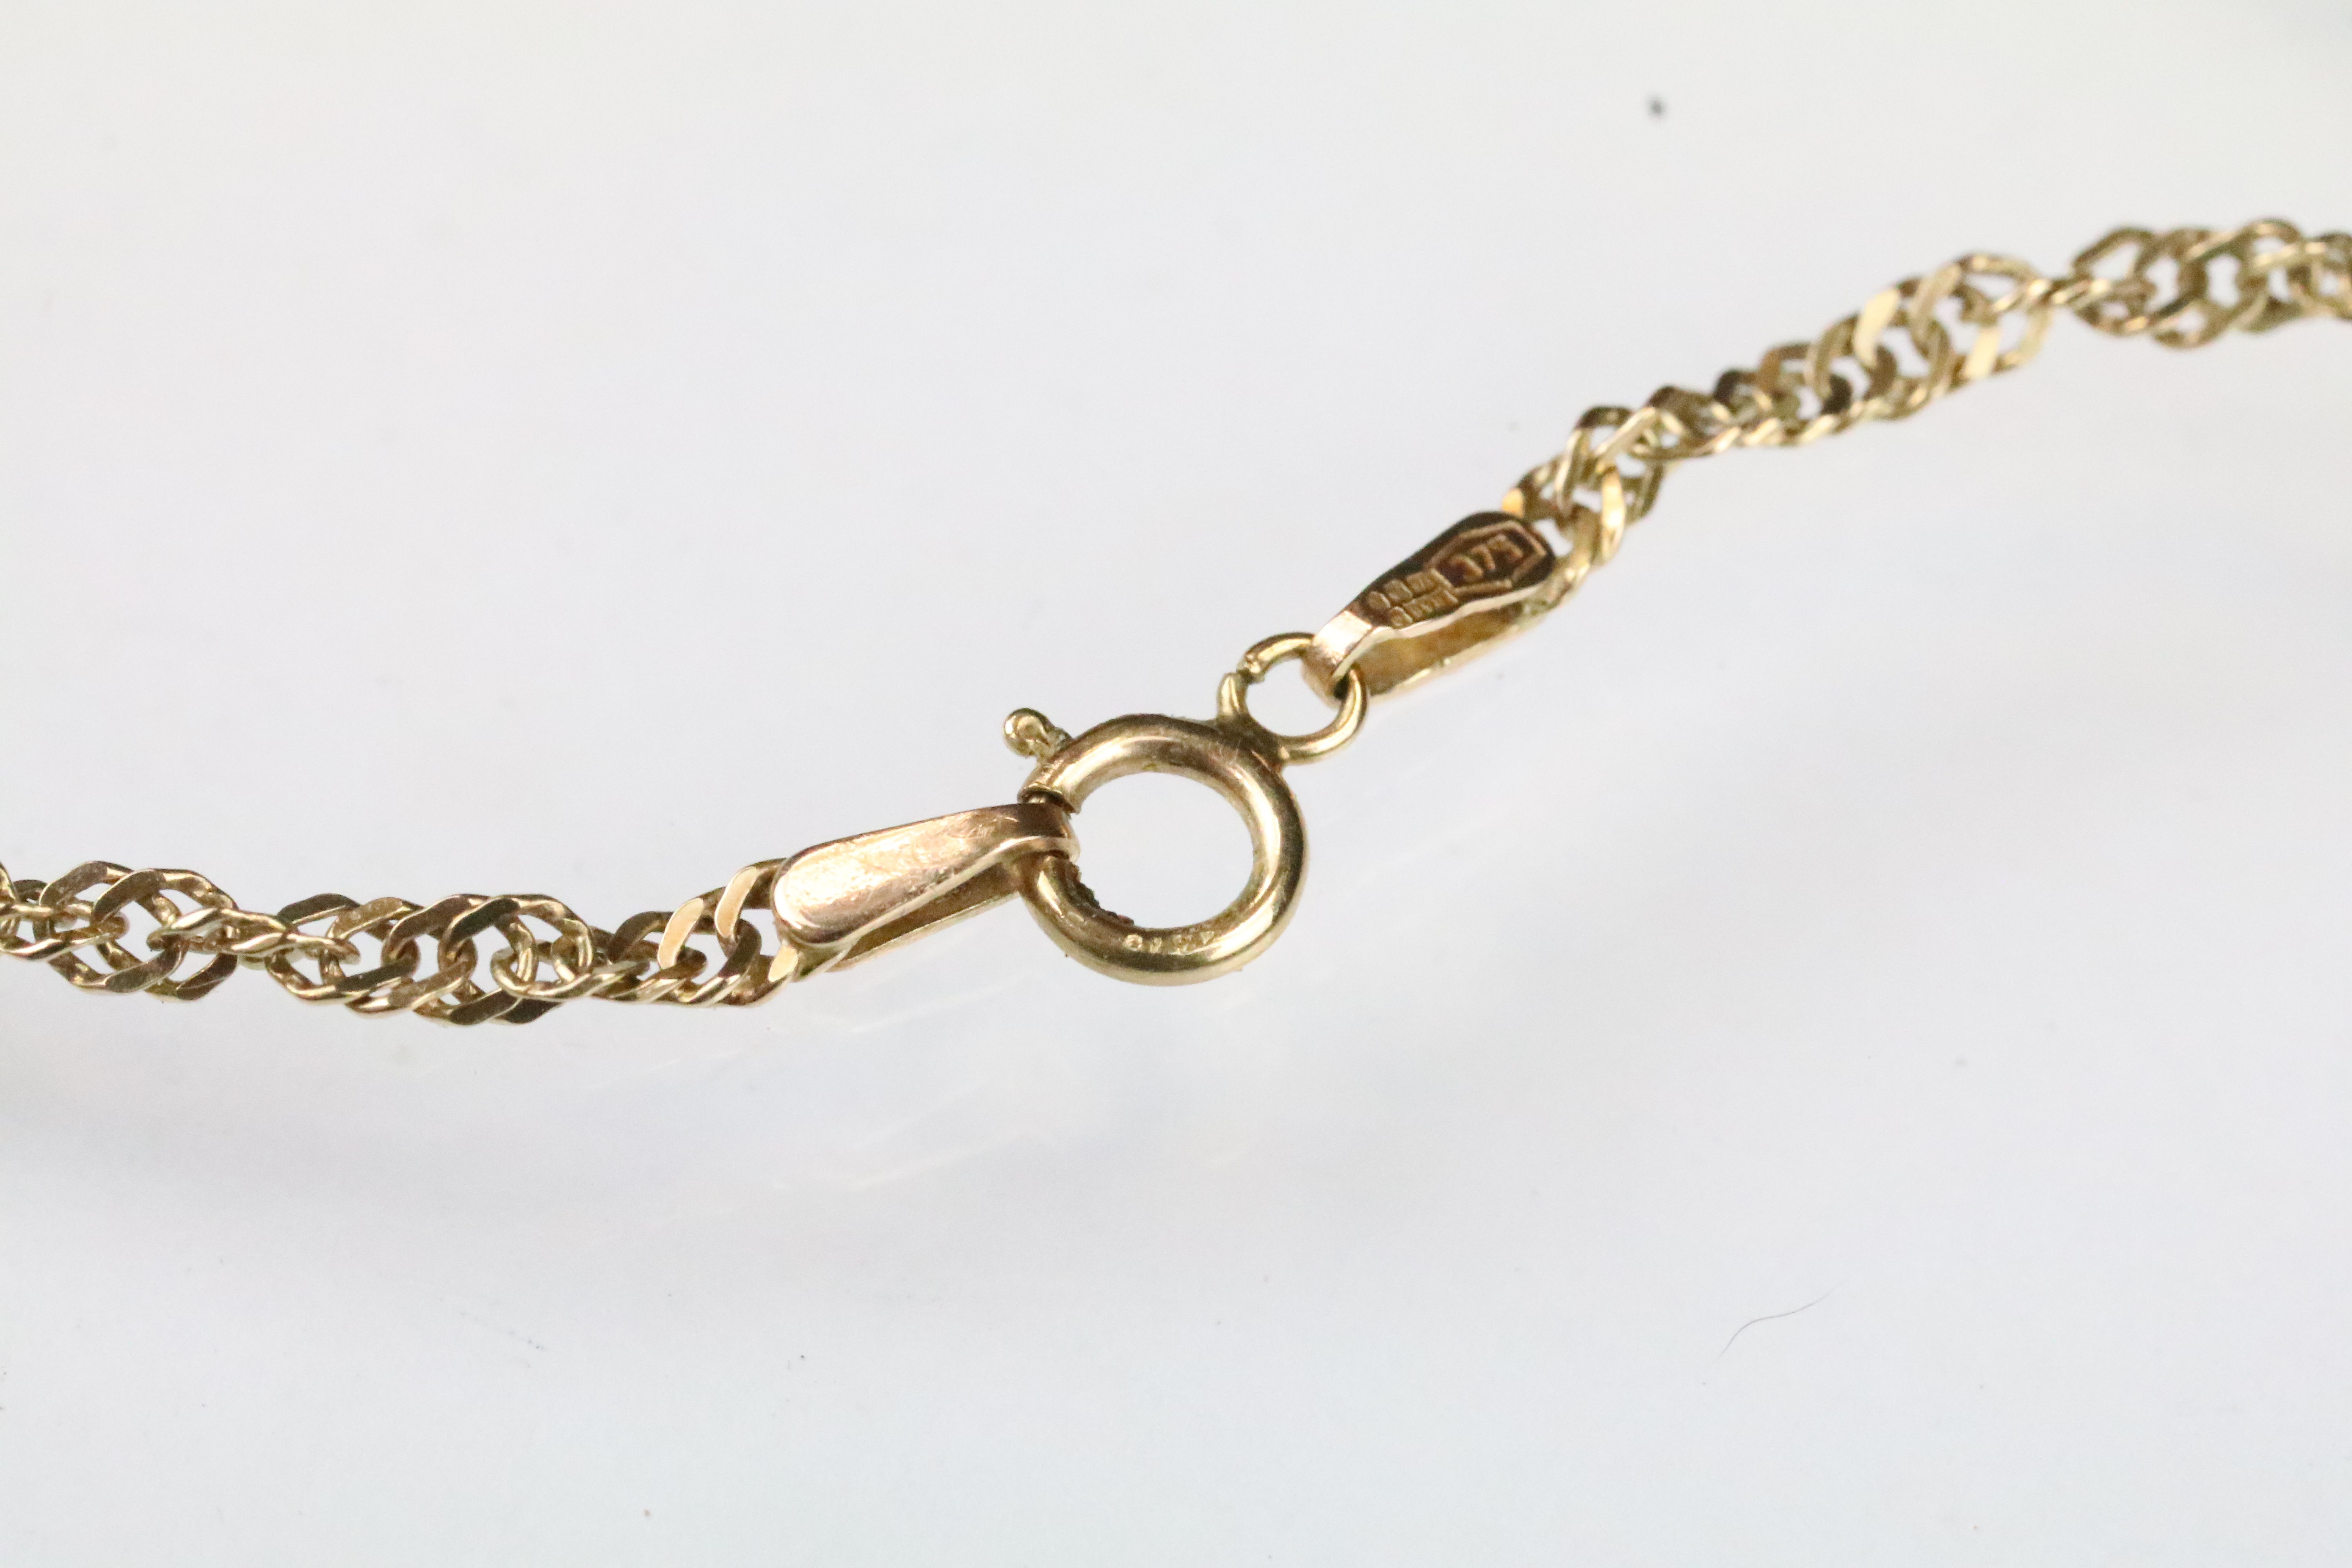 9ct gold fine rope twist necklace chain with spring ring clasp (hallmarked to clasp) together with a - Image 4 of 9